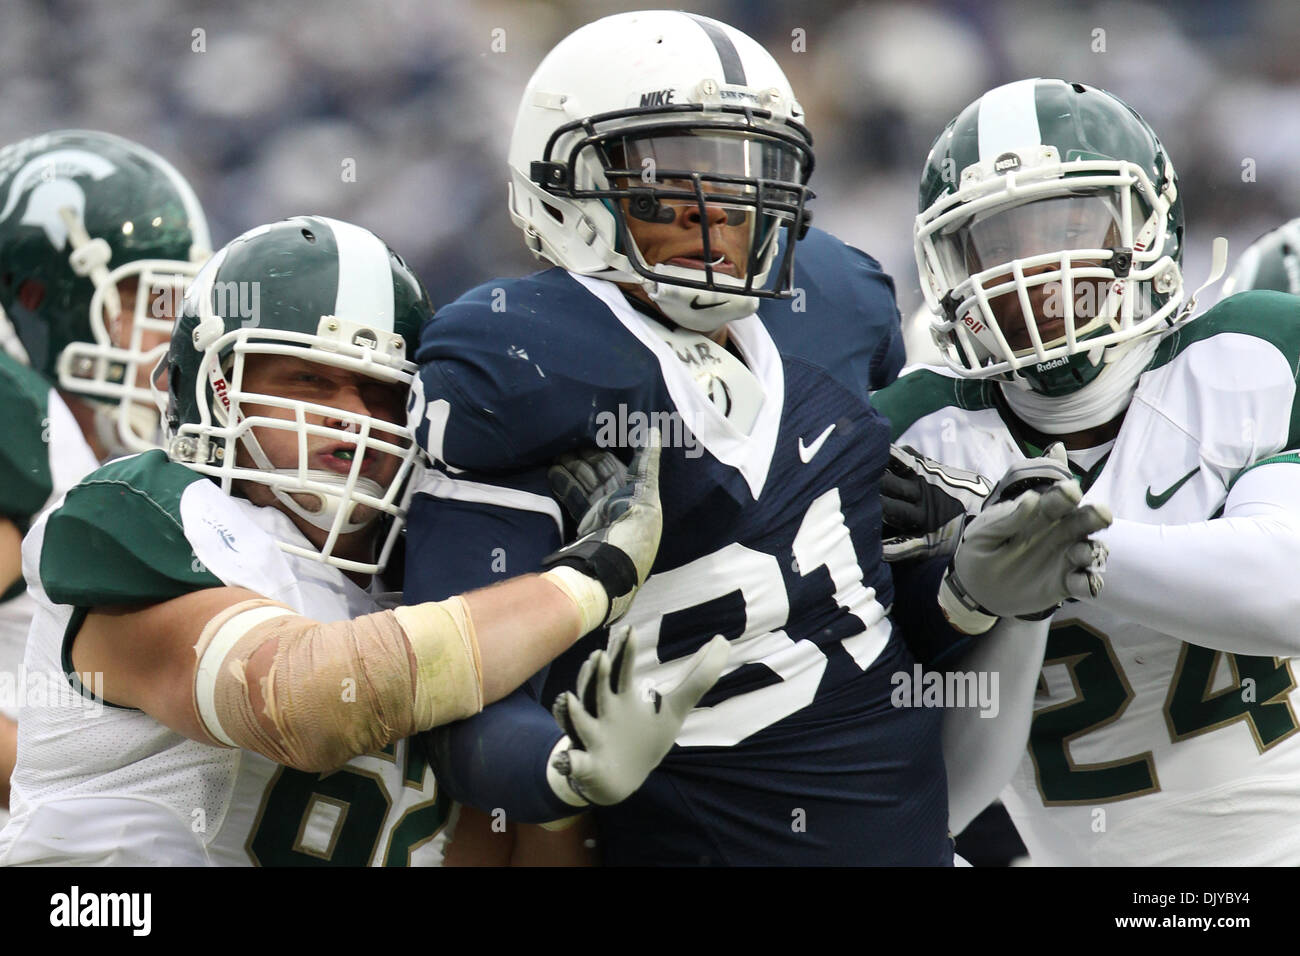 Nov. 27, 2010 - University Park, Pennsylvania, United States of America - Penn State Nittany Lions defensive end Jack Crawford (81) is double teamed by Michigan State Spartans guard Chris McDonald (62) and  running back Le'Veon Bell (24) during game action at Beaver Stadium in University Park, Pennsylvania. (Credit Image: © Alex Cena/Southcreek Global/ZUMAPRESS.com) Stock Photo